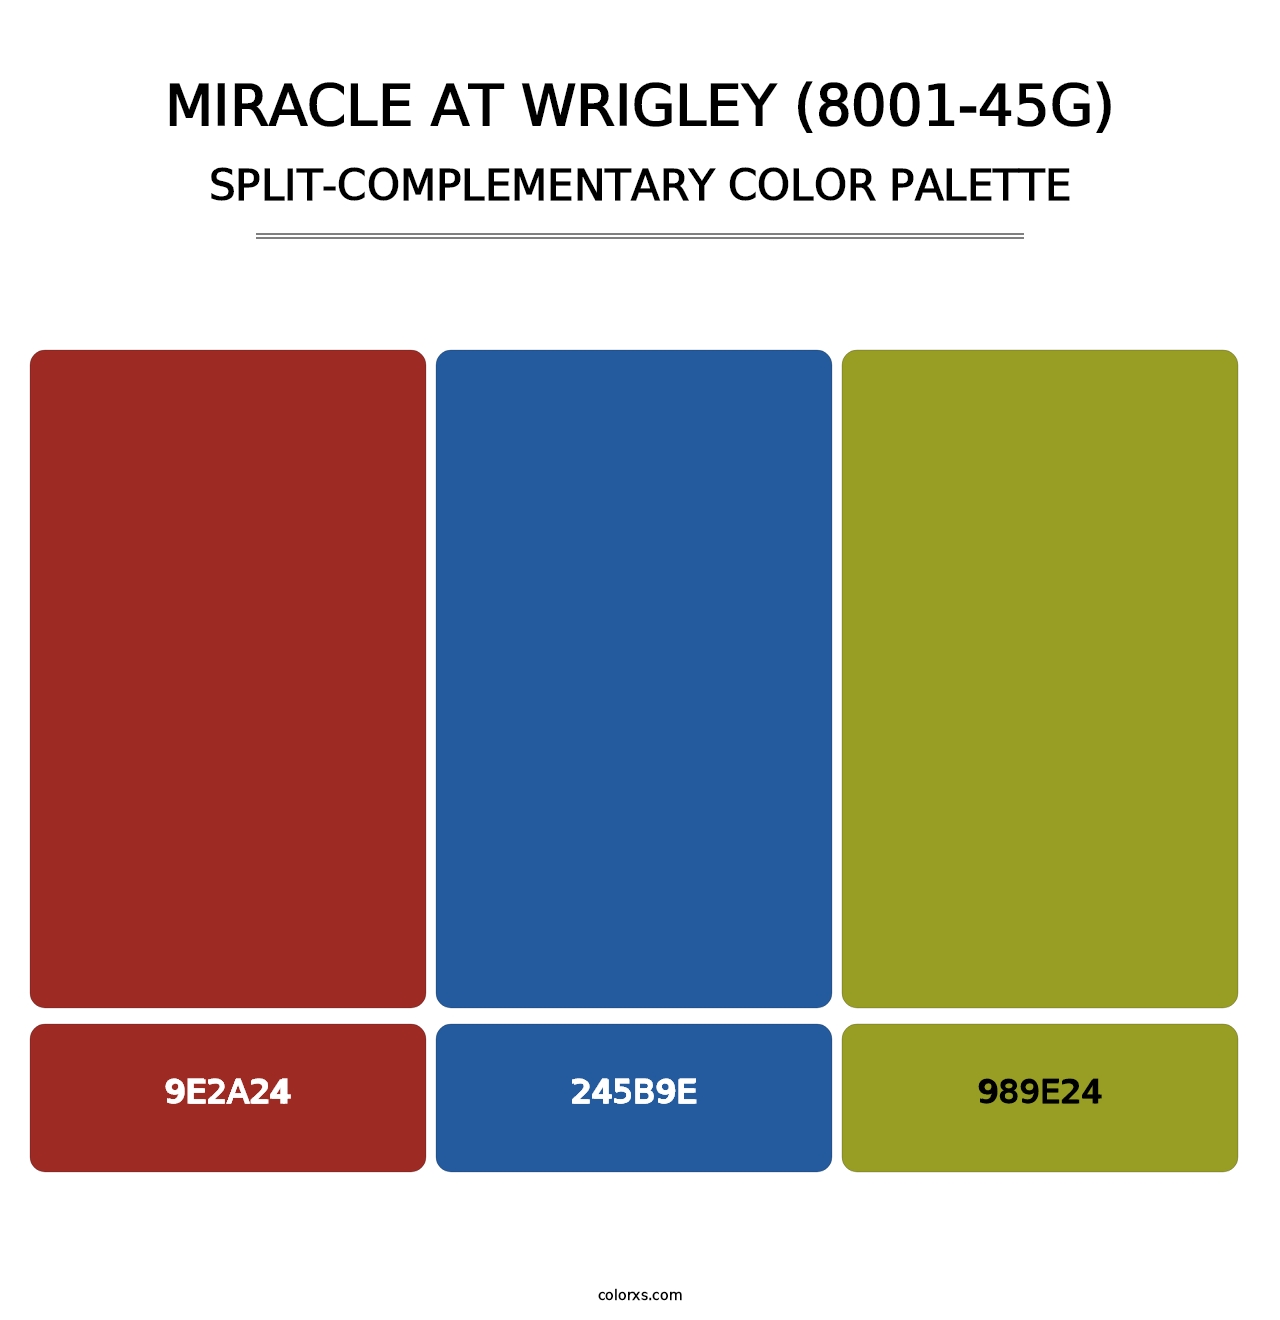 Miracle at Wrigley (8001-45G) - Split-Complementary Color Palette